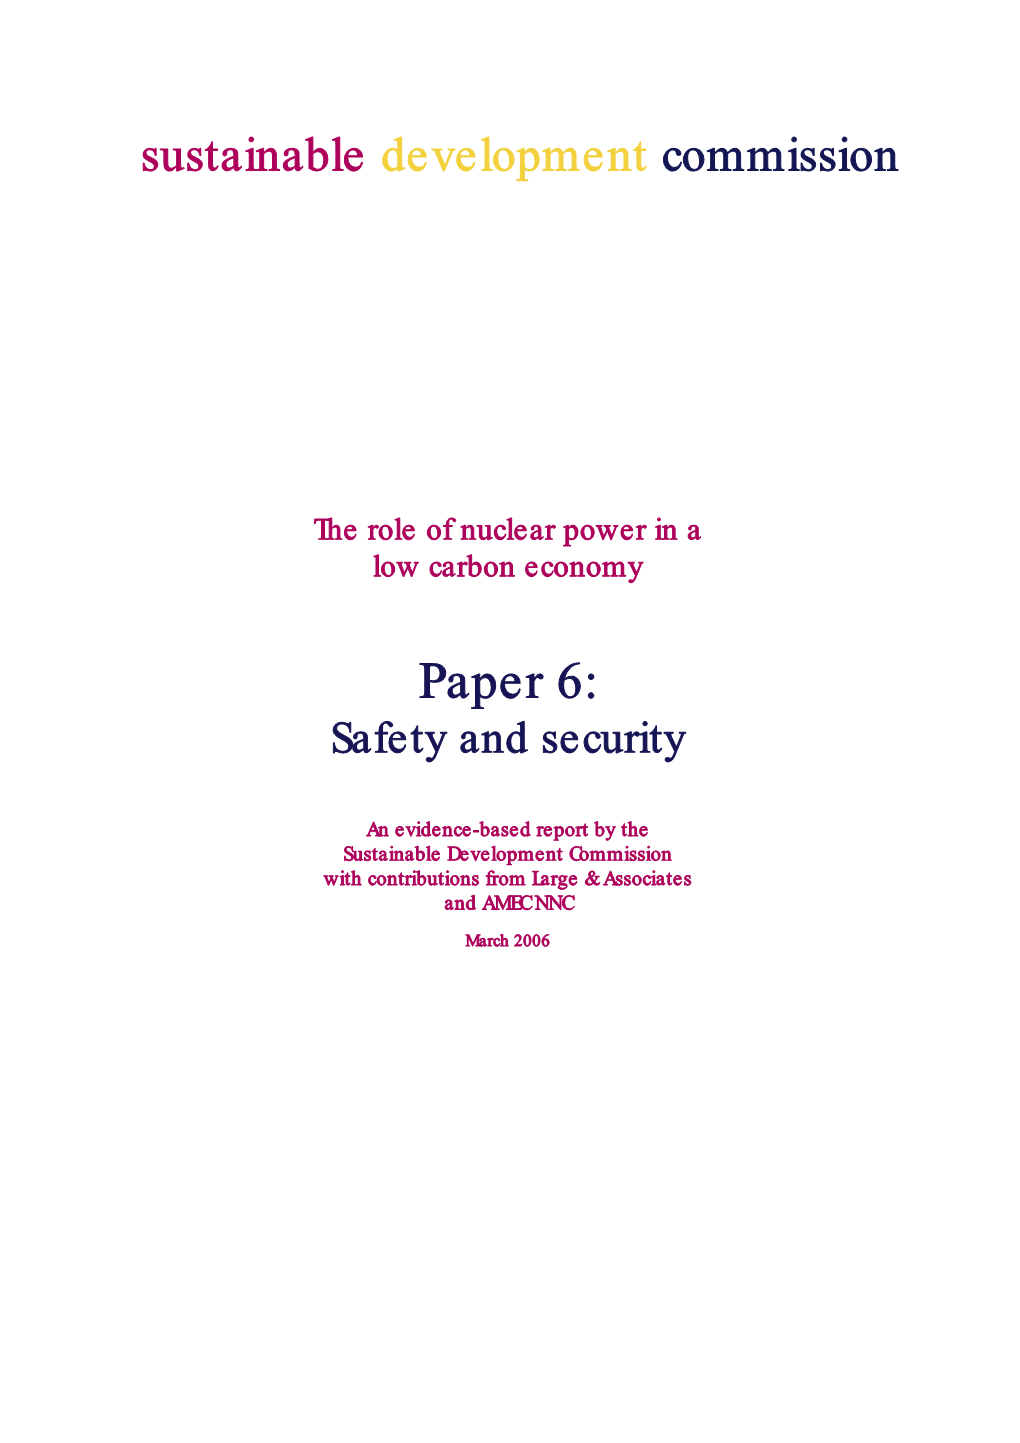 Nuclear Paper 6: Safety and Security